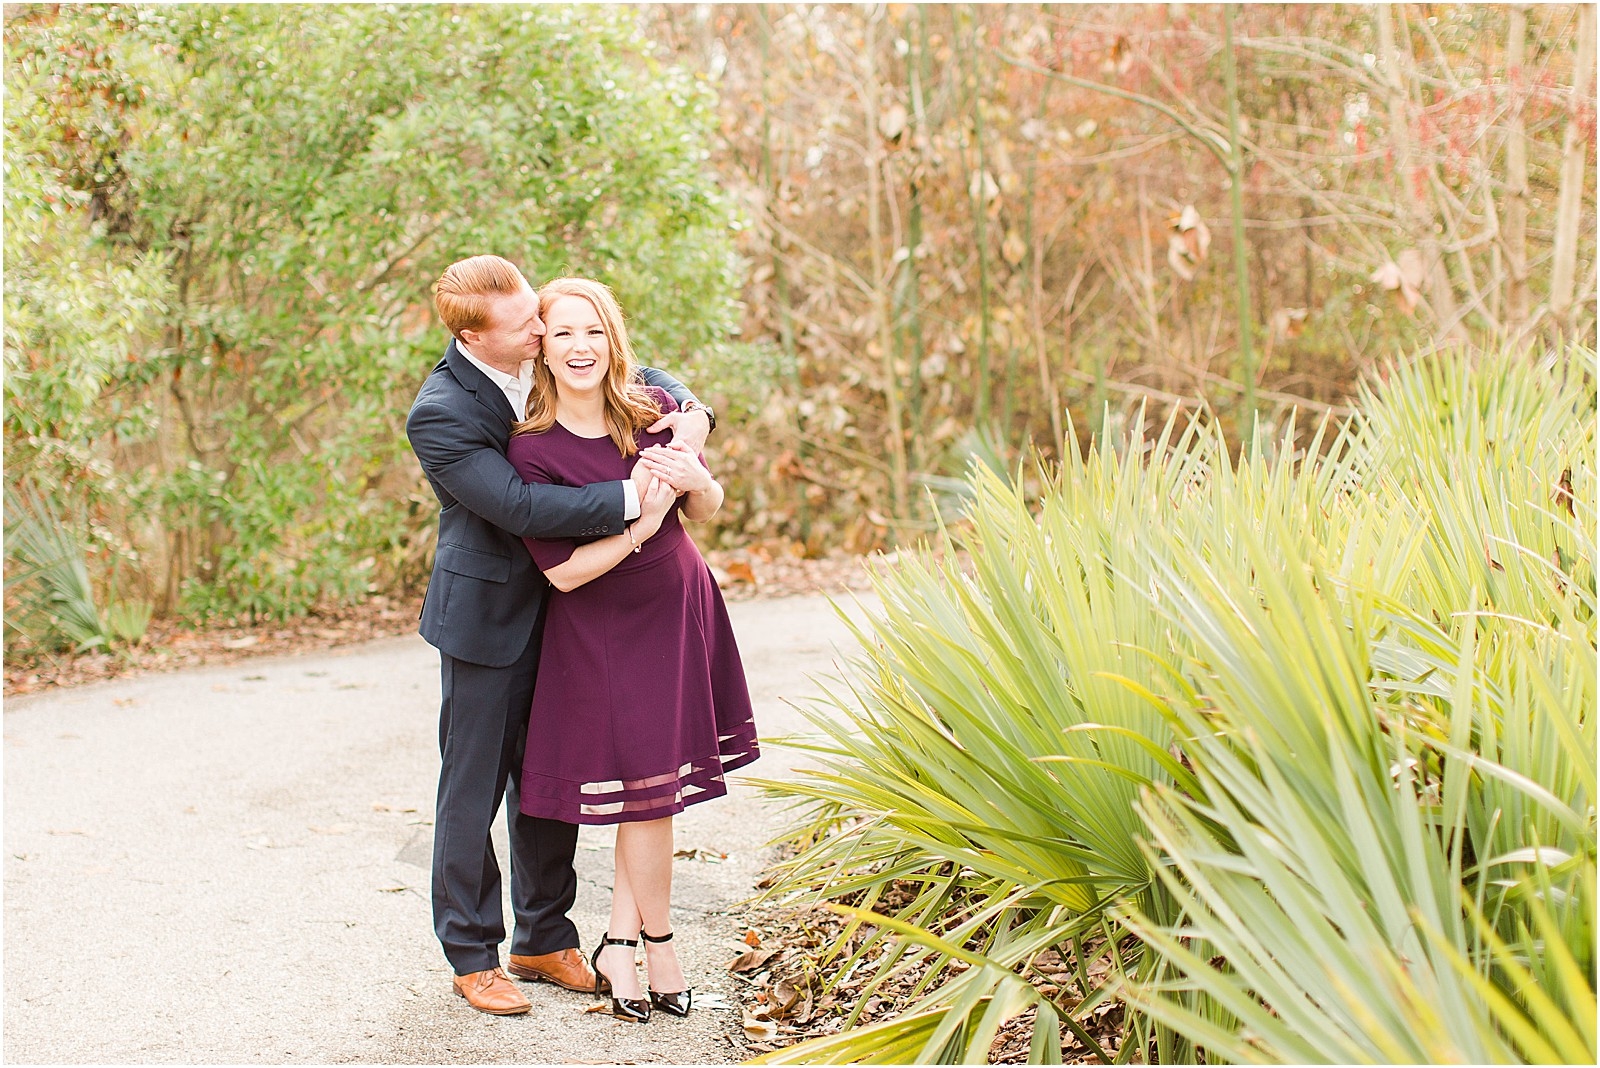 A Mesker Park Zoo Engagement Session | Jennah and Steve | Bret and Brandie Photography009.jpg